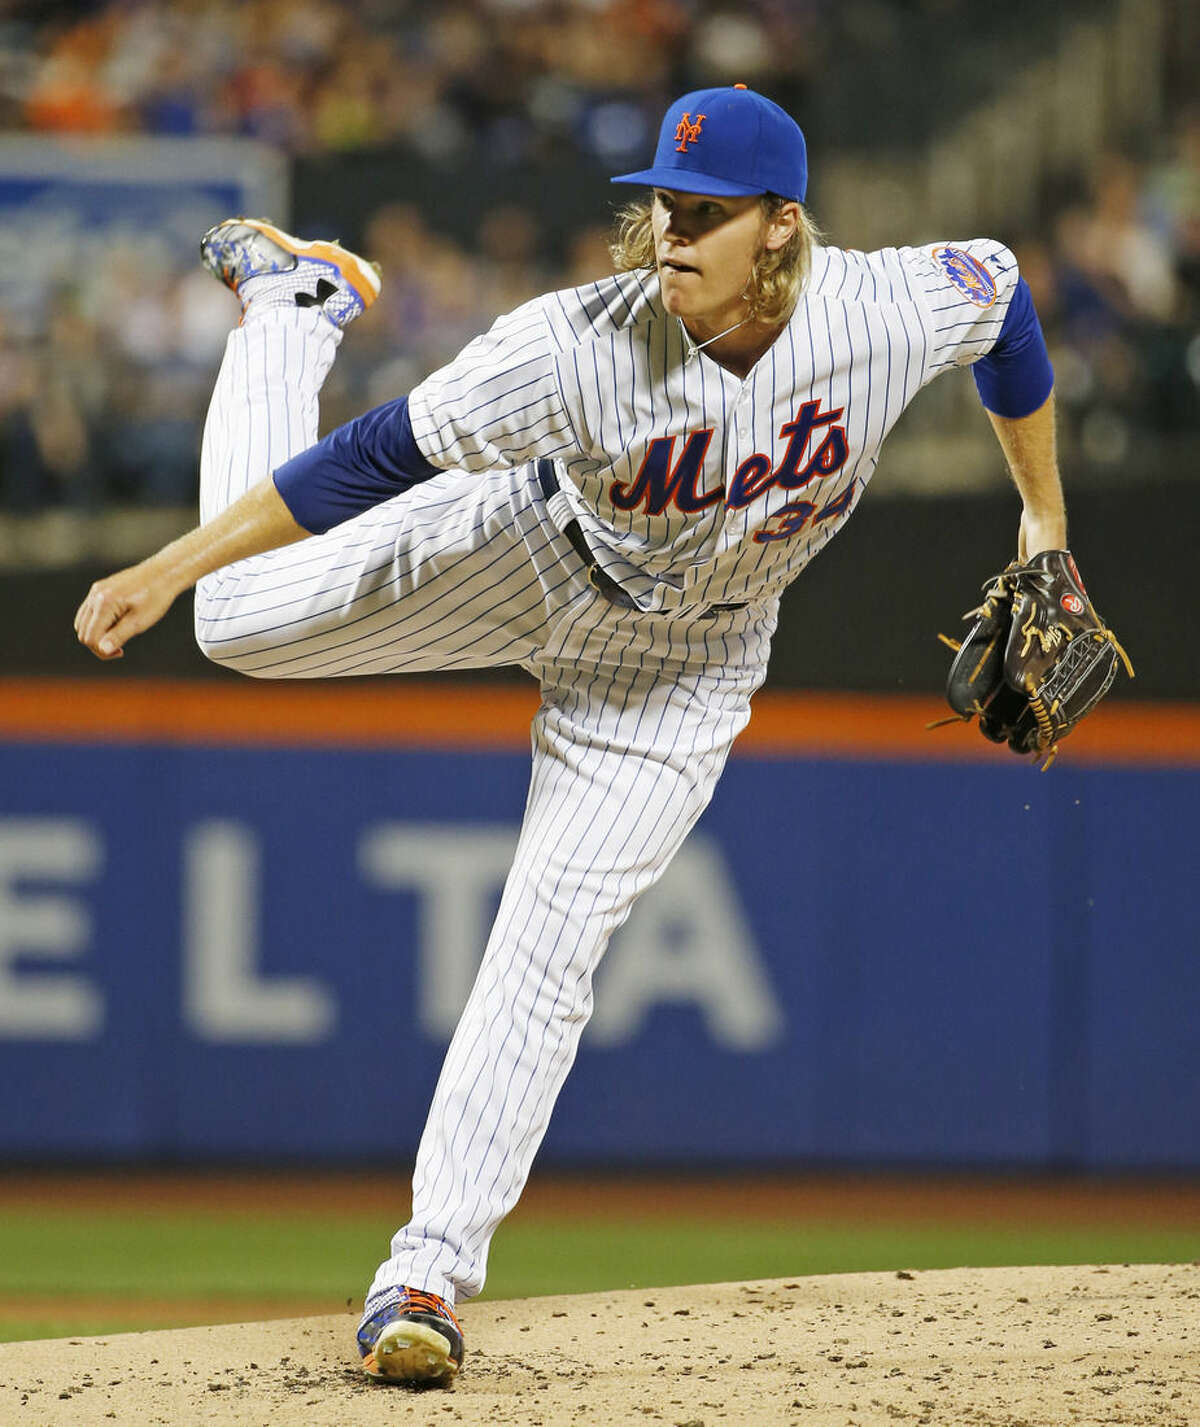 New York Mets starting pitcher Noah Syndergaard delivers during the second inning of a baseball game against the Washington Nationals in New York, Sunday, Aug. 2, 2015. (AP Photo/Kathy Willens)